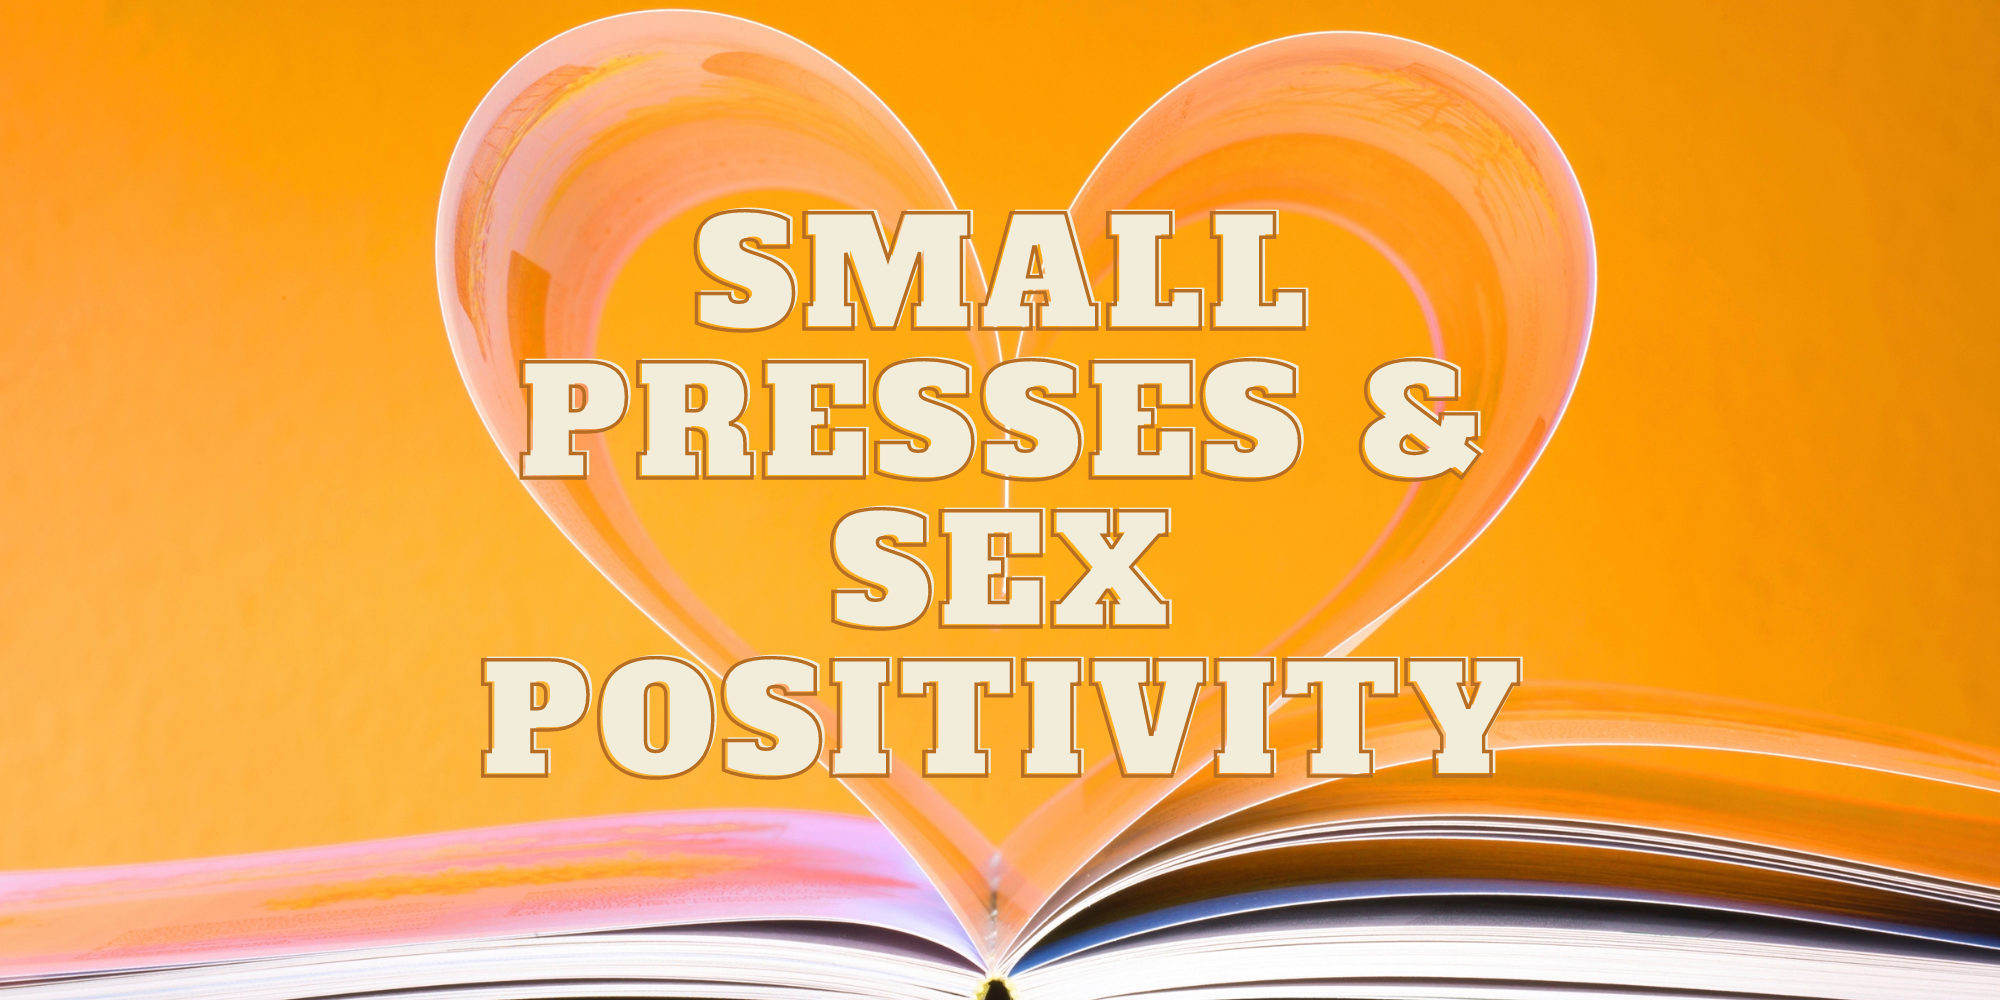 book pages bent into shape of a heart with the text "Small Presses & Sex Positivity" over the book